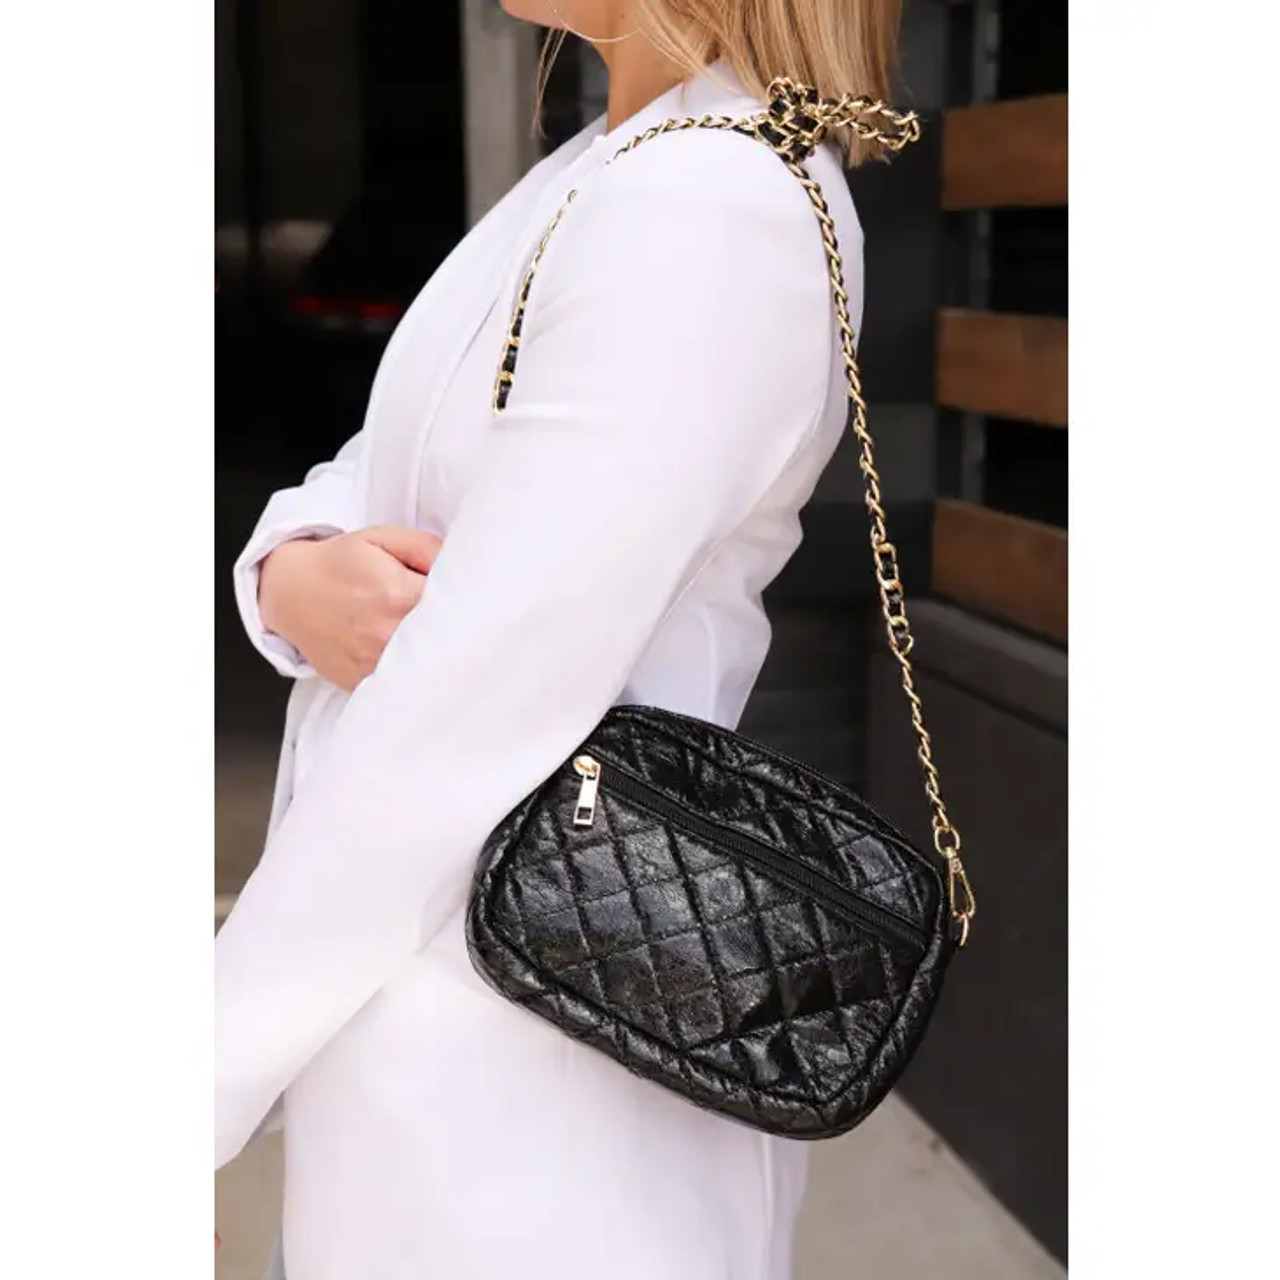 Shop Metallic Crossbody Bag From Scout & Molly's -- Scout and